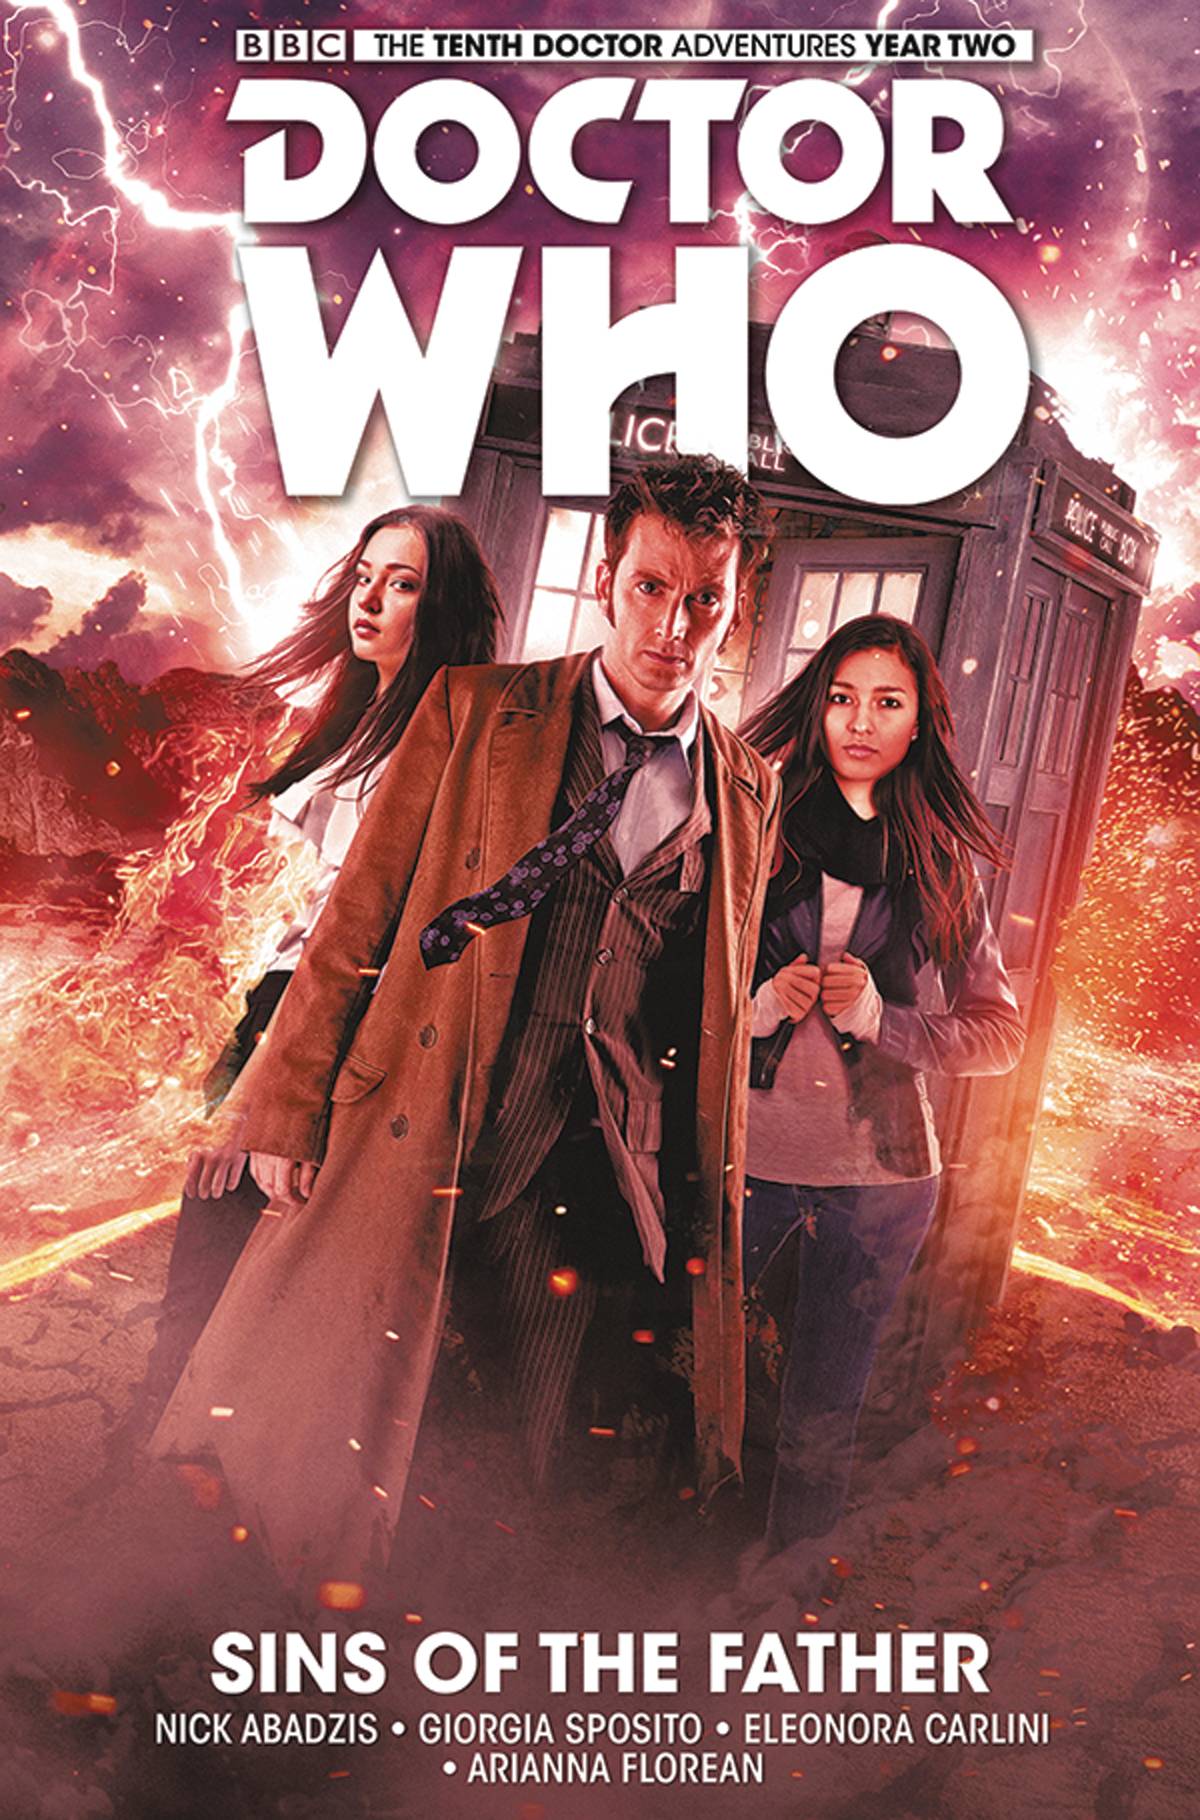 Doctor Who 10th Doctor Hardcover Graphic Novel Volume 6 Sins of the Father